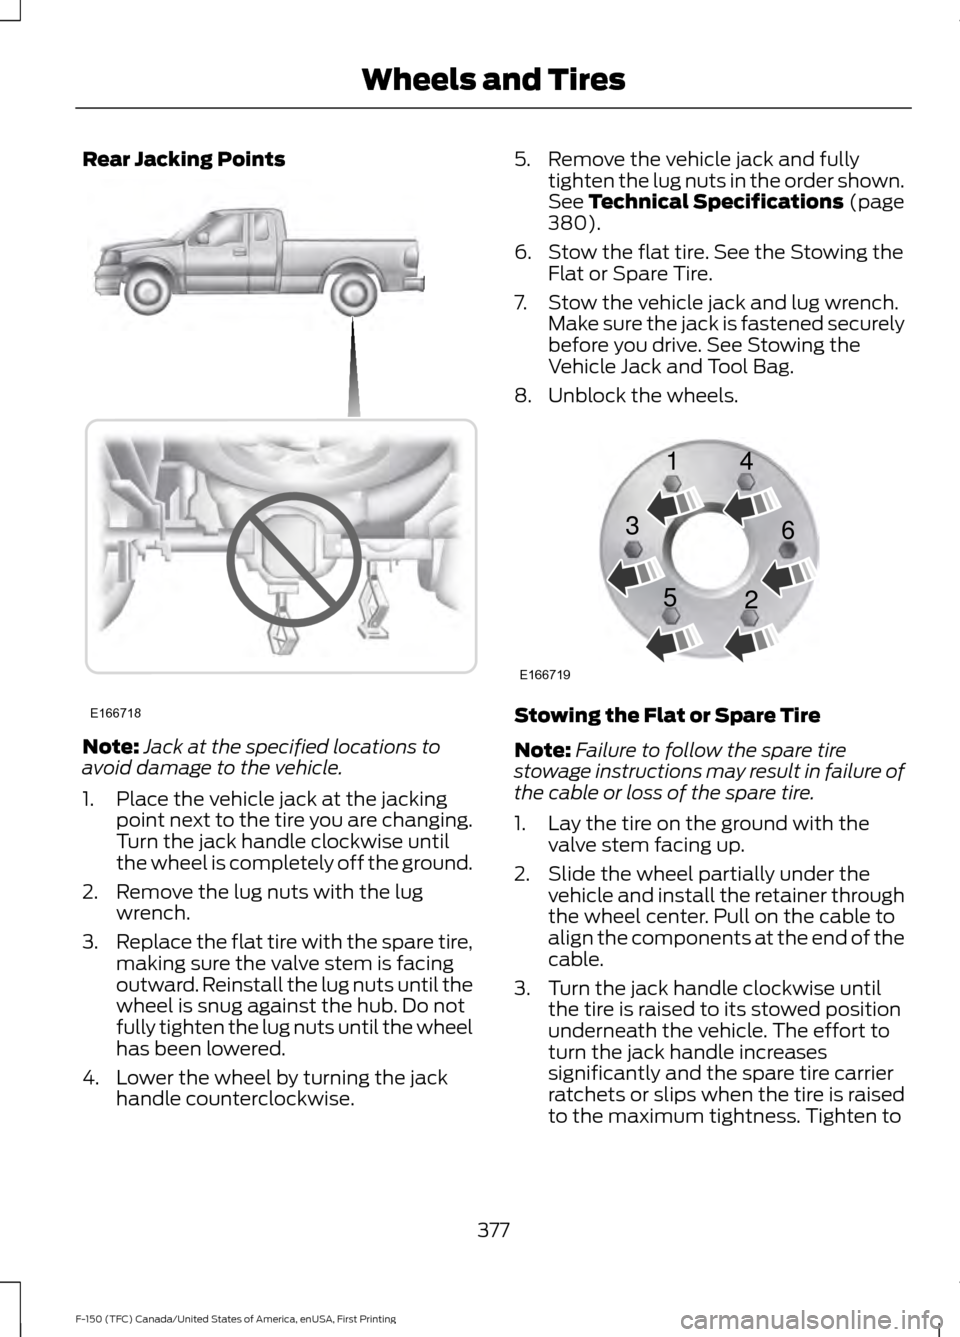 FORD F150 2017 13.G Owners Manual Rear Jacking Points
Note:
Jack at the specified locations to
avoid damage to the vehicle.
1. Place the vehicle jack at the jacking point next to the tire you are changing.
Turn the jack handle clockwi